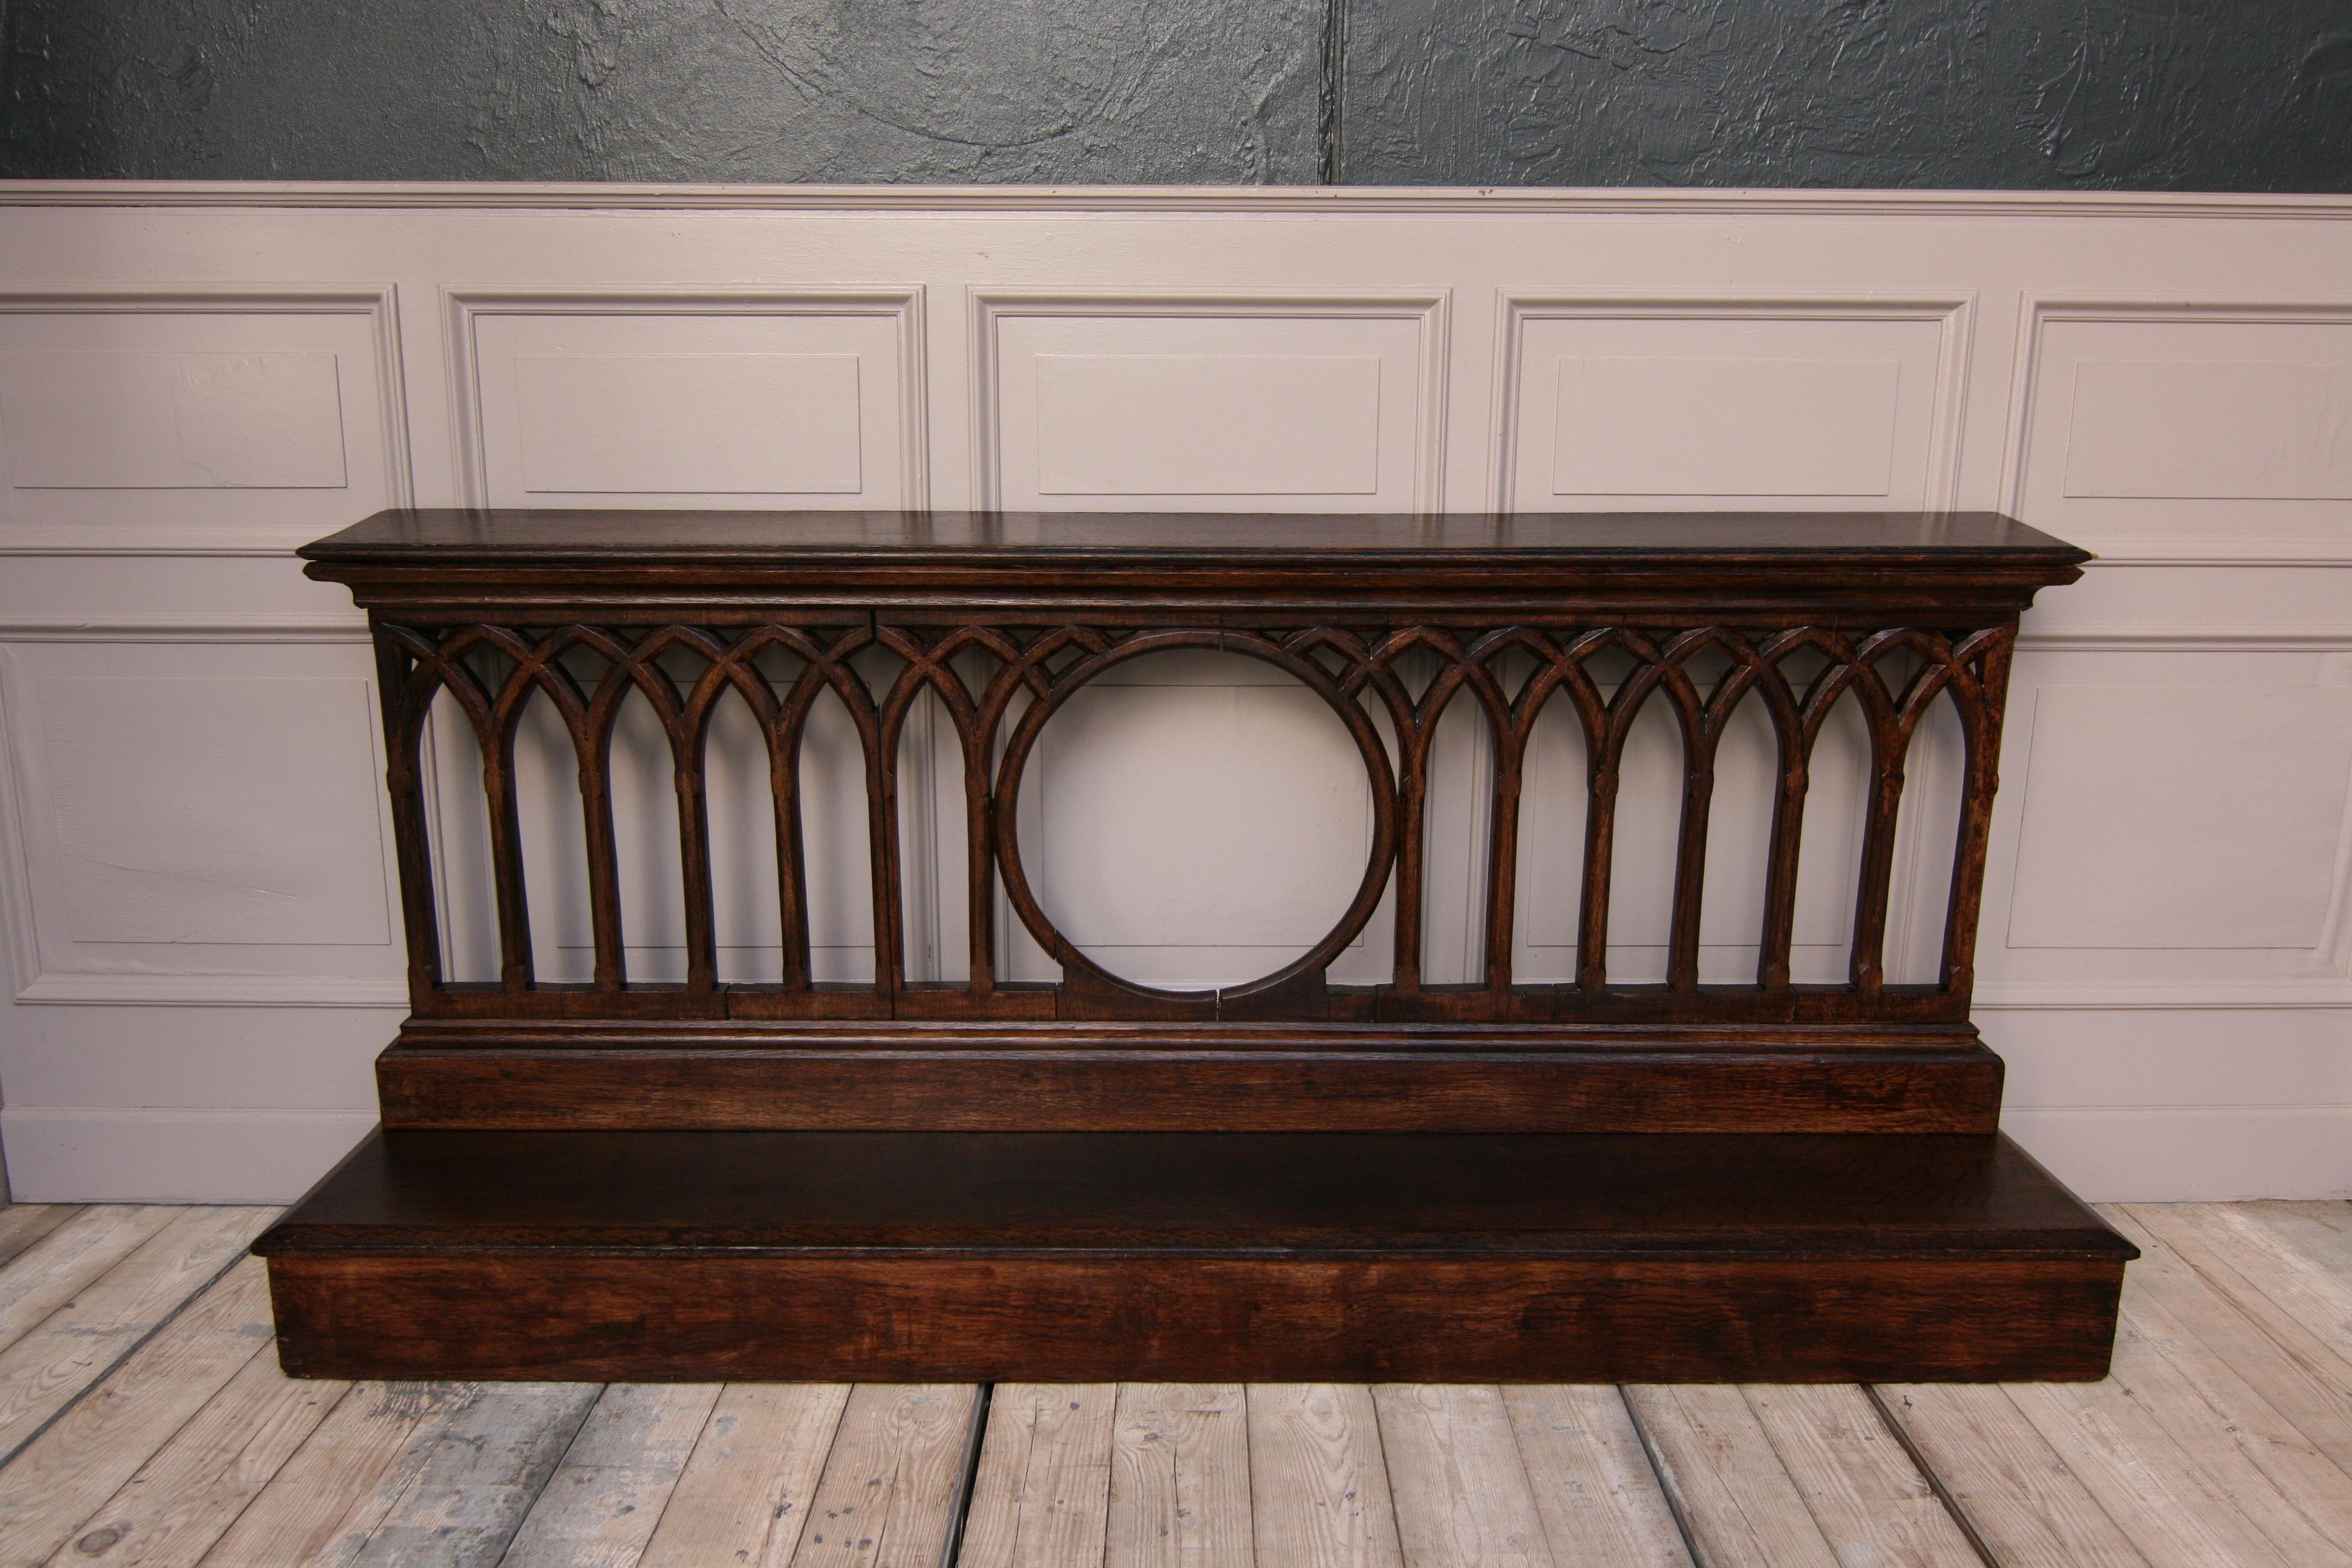 Gothic Revival Church Prayer Bench or Console Made of Oak